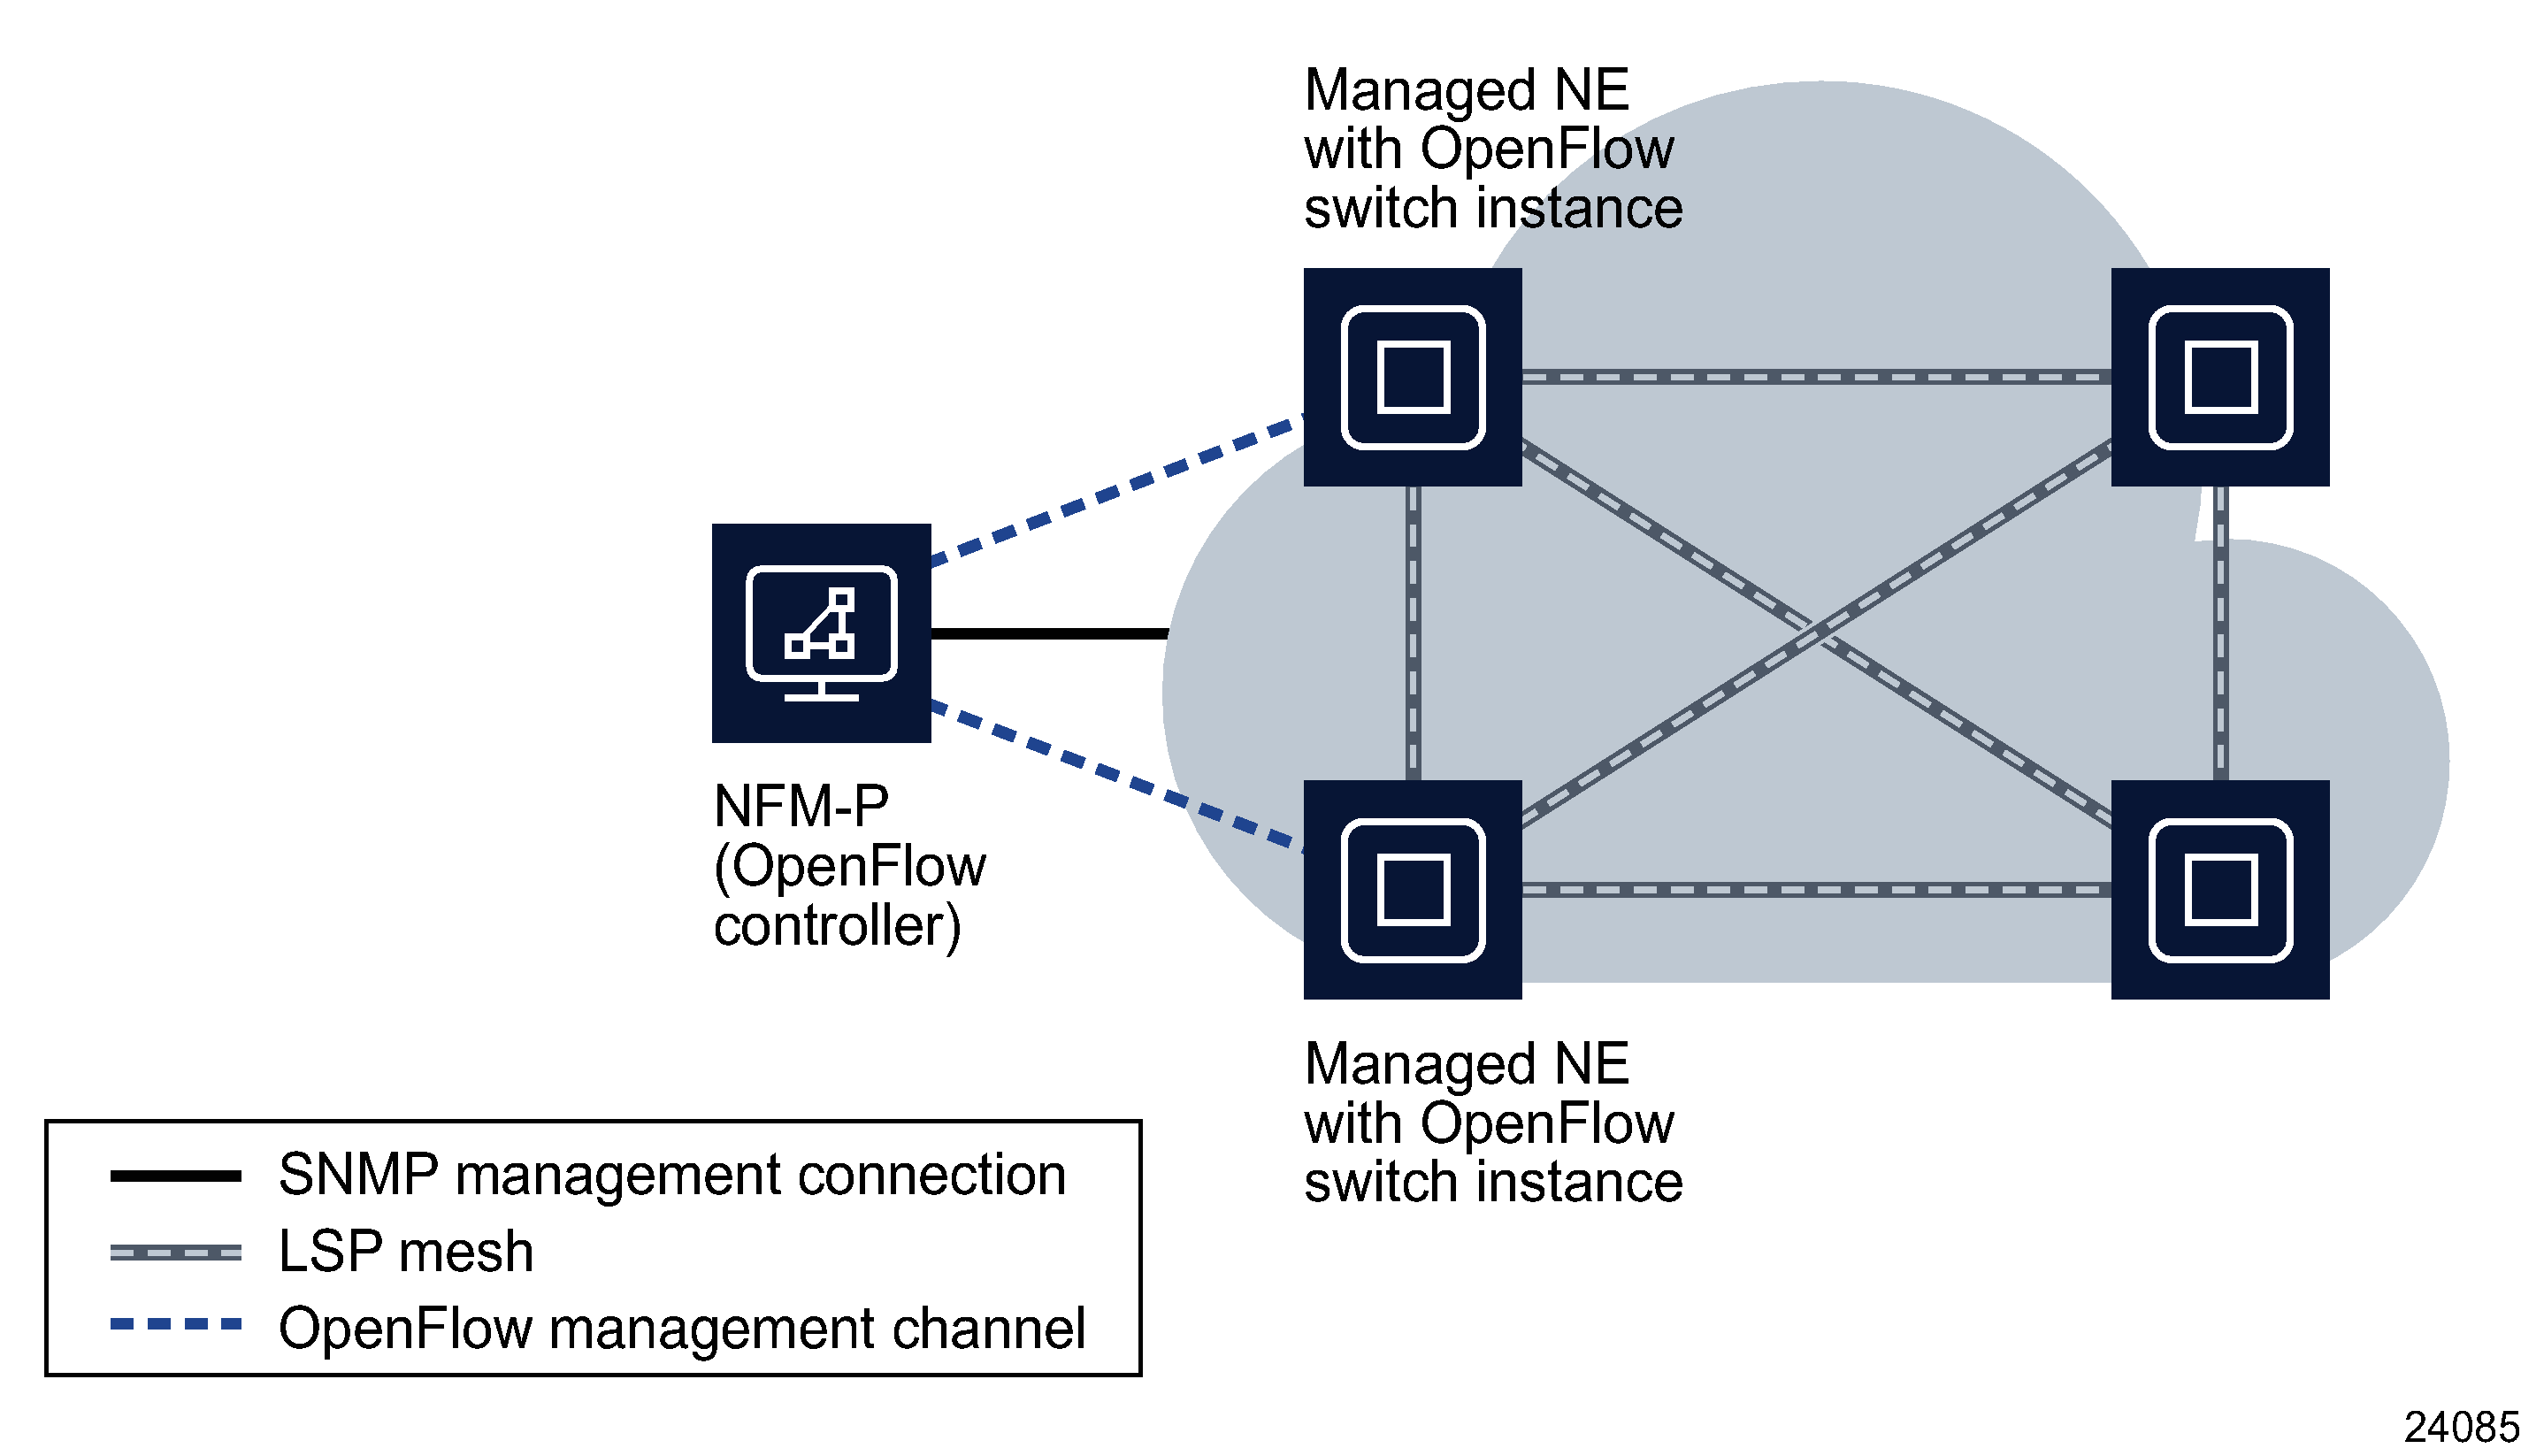 Basic OpenFlow management topology